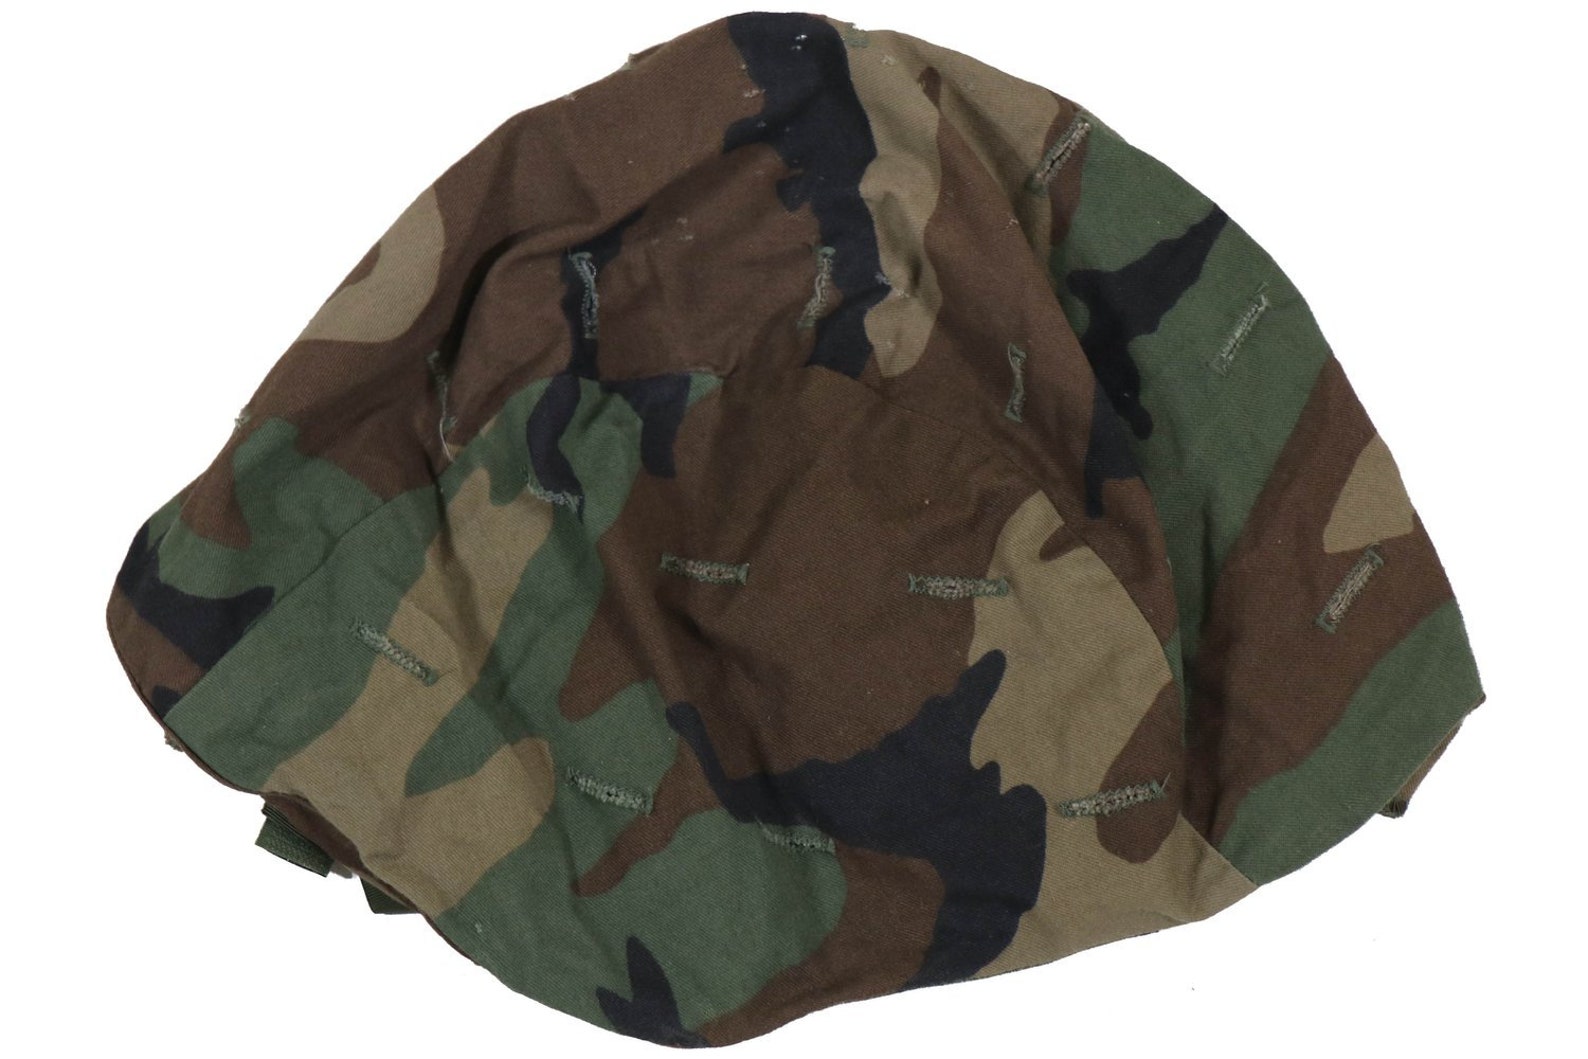 Authentic US Army PASGT Helmet Cover Woodland M81 BDU Camouflage ...